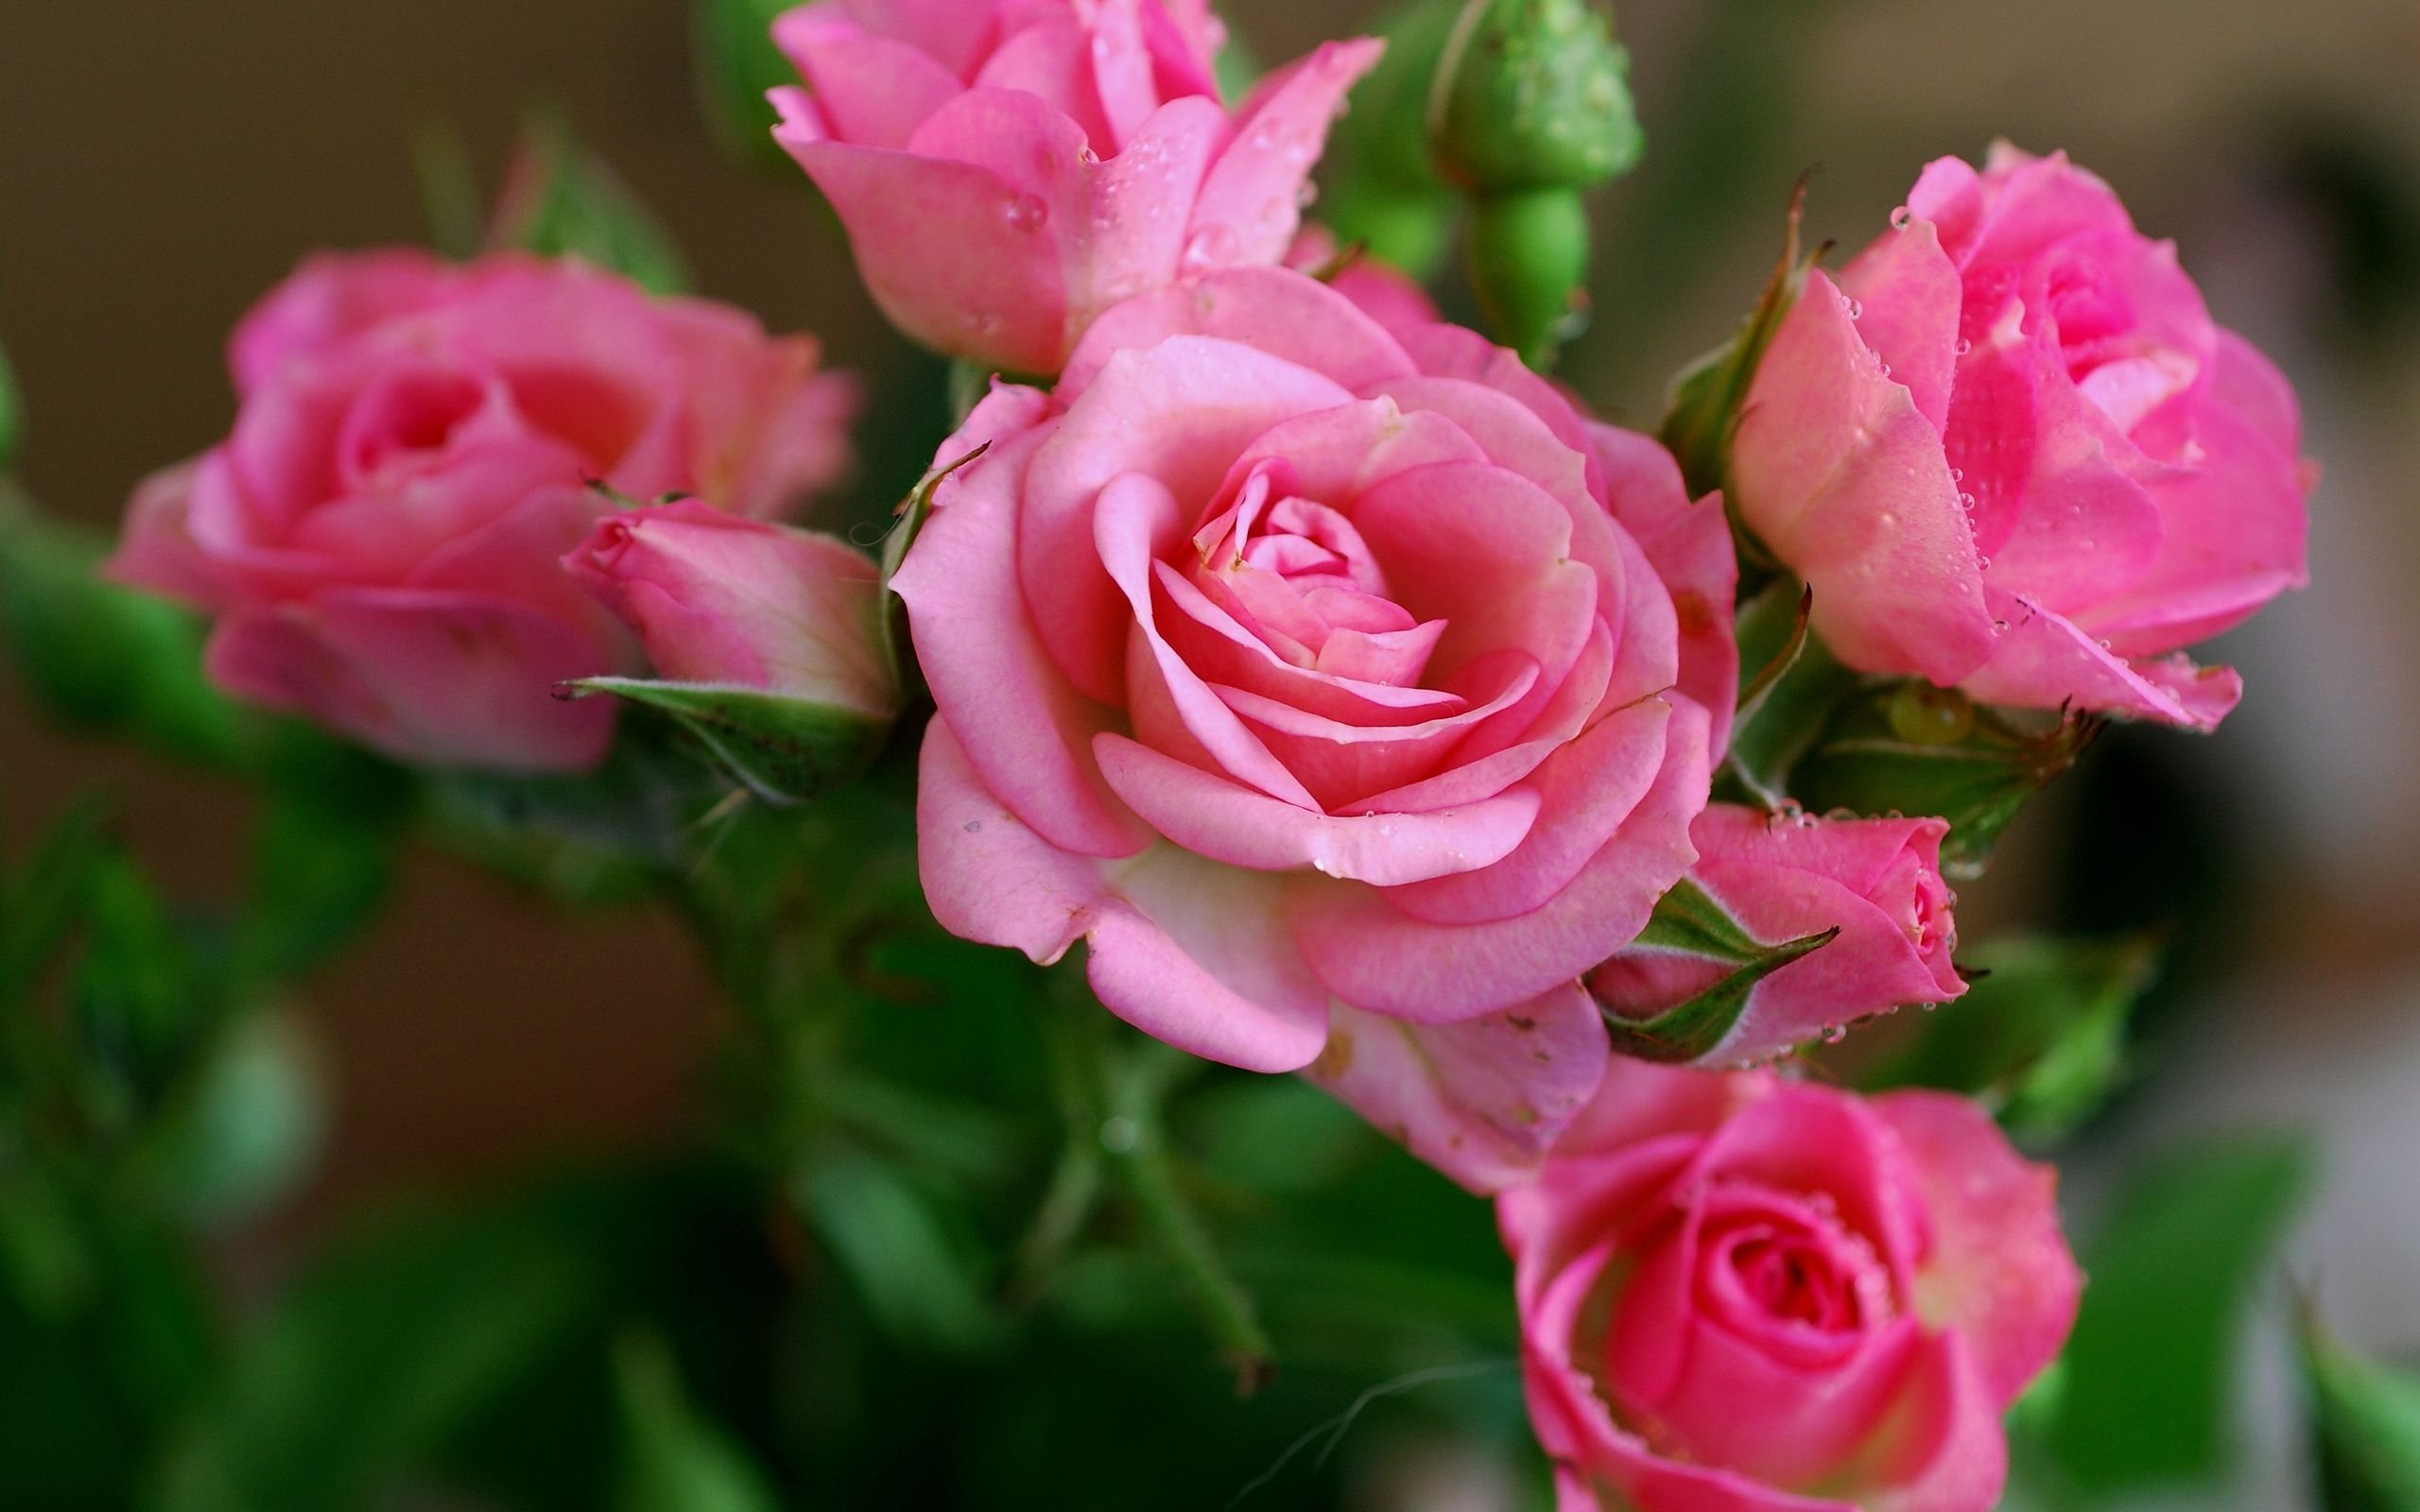  rose flowers Nature wallpapers free download HD Wallpapers for Free